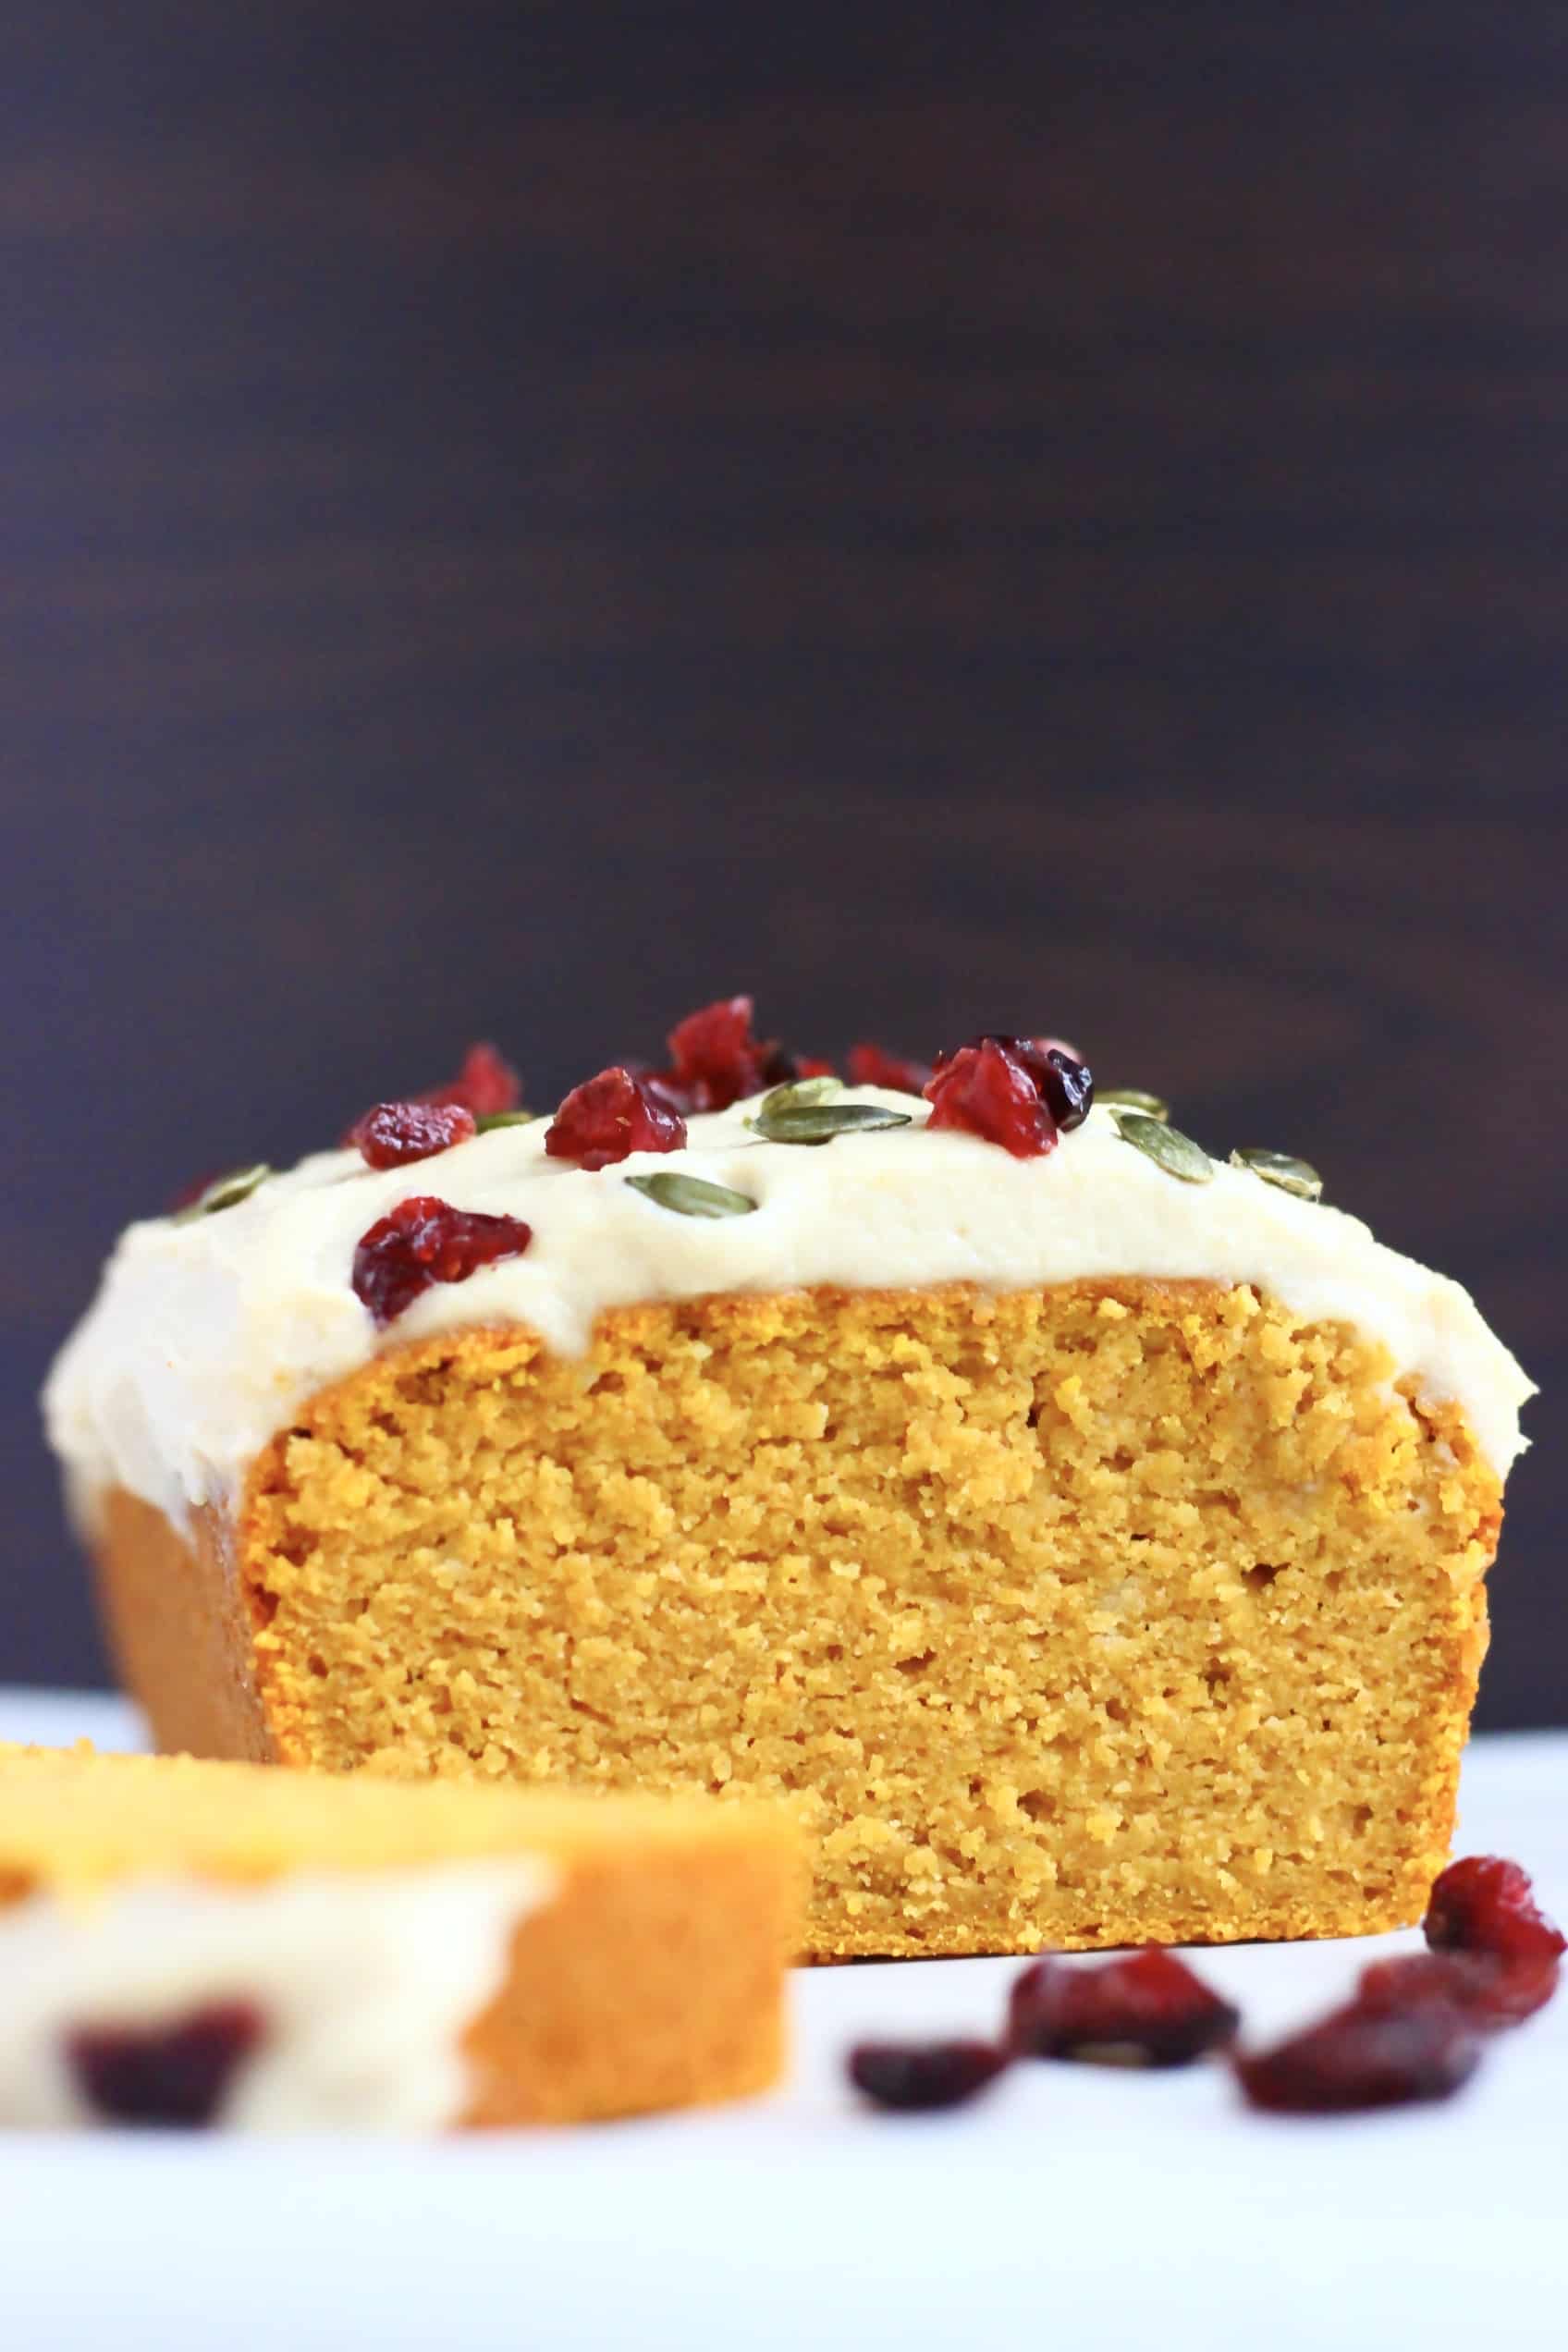 A sliced gluten-free vegan pumpkin loaf cake topped with cream cheese frosting, dried cranberries and pumpkin seeds